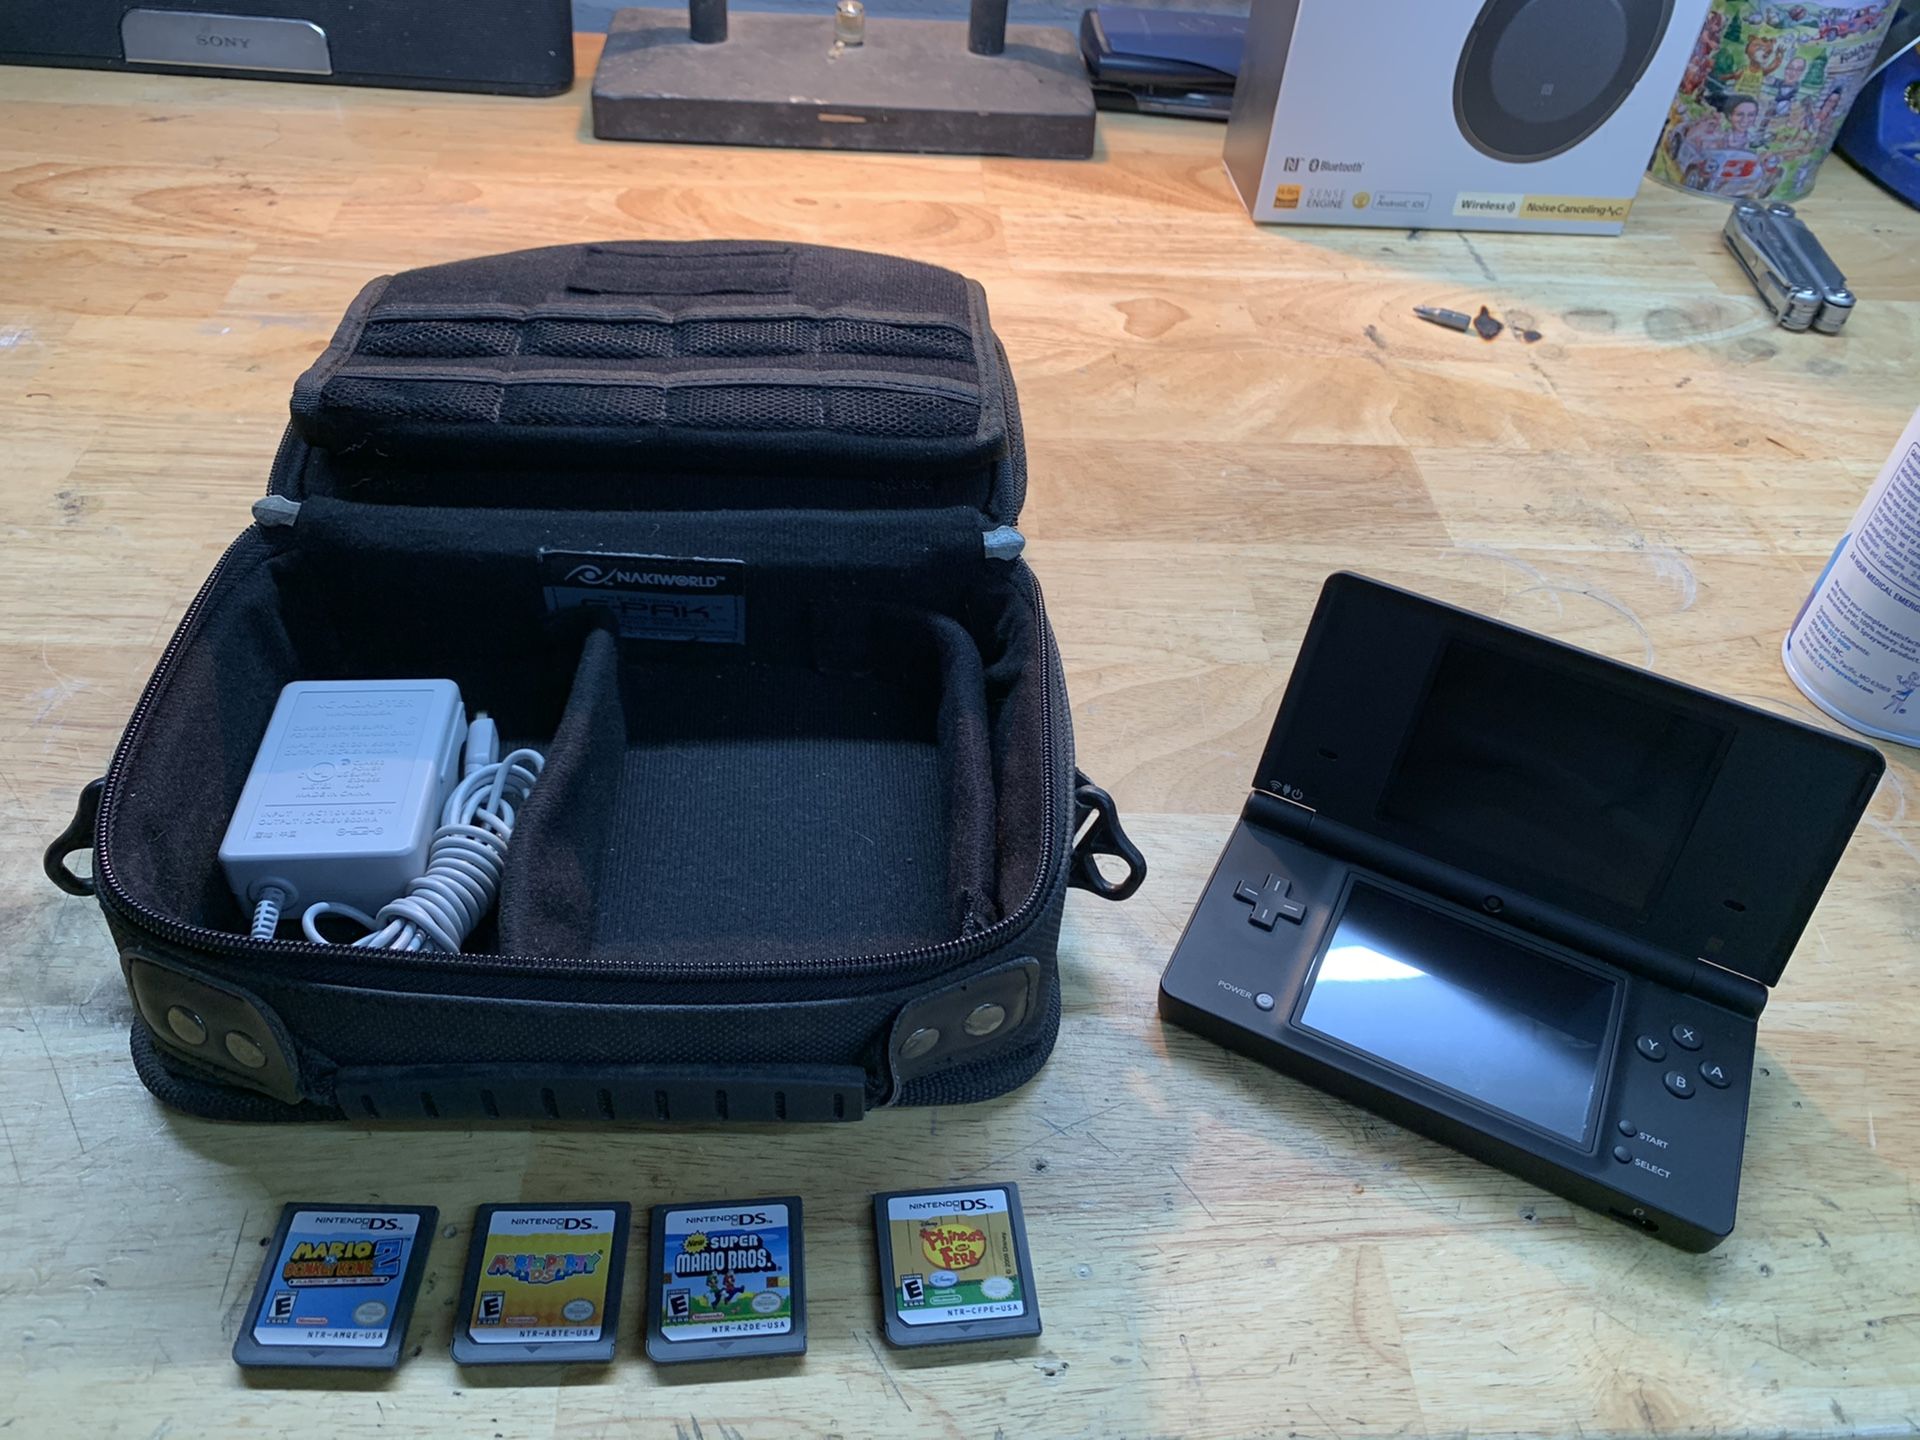 DSi with 4 games and case